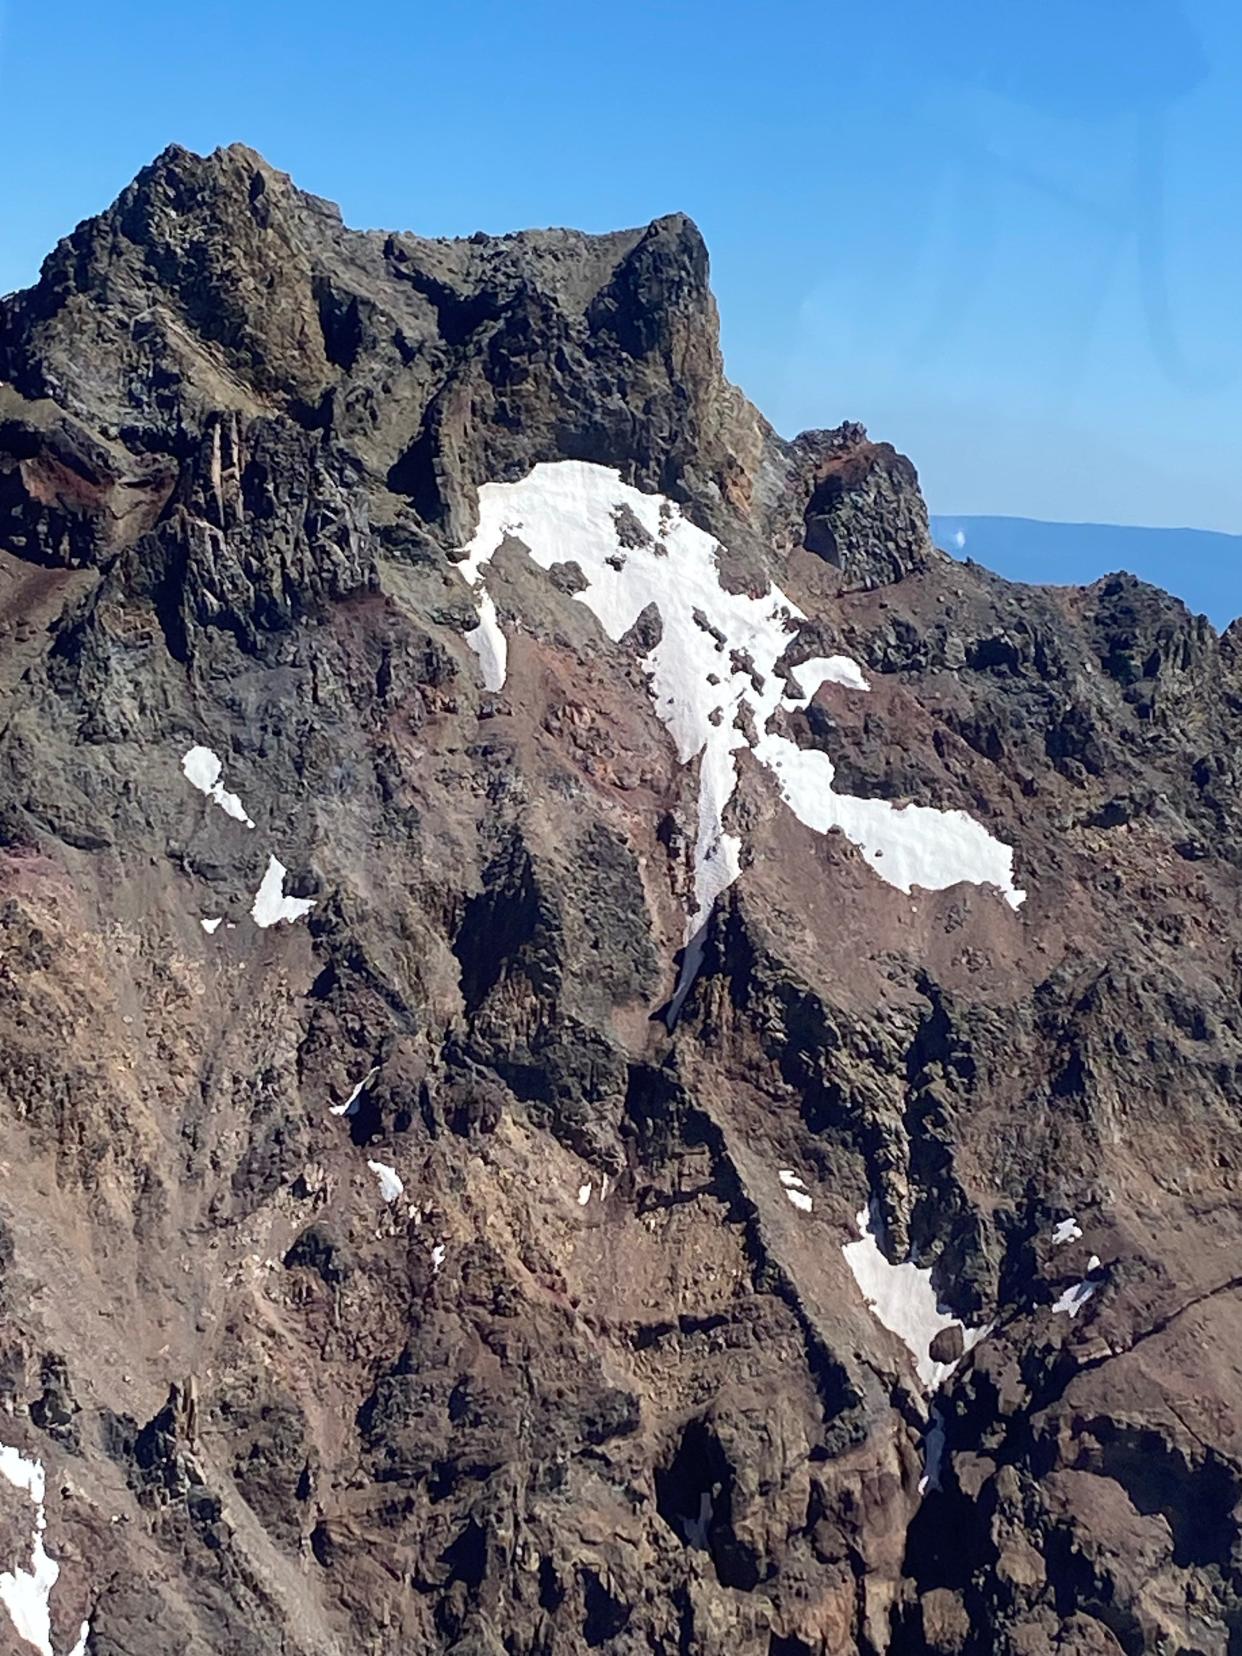 Search and rescue personnel and volunteers were searching for a hiker who fell several hundred feet on Monday near the summit of North Sister in steep and rocky terrain.